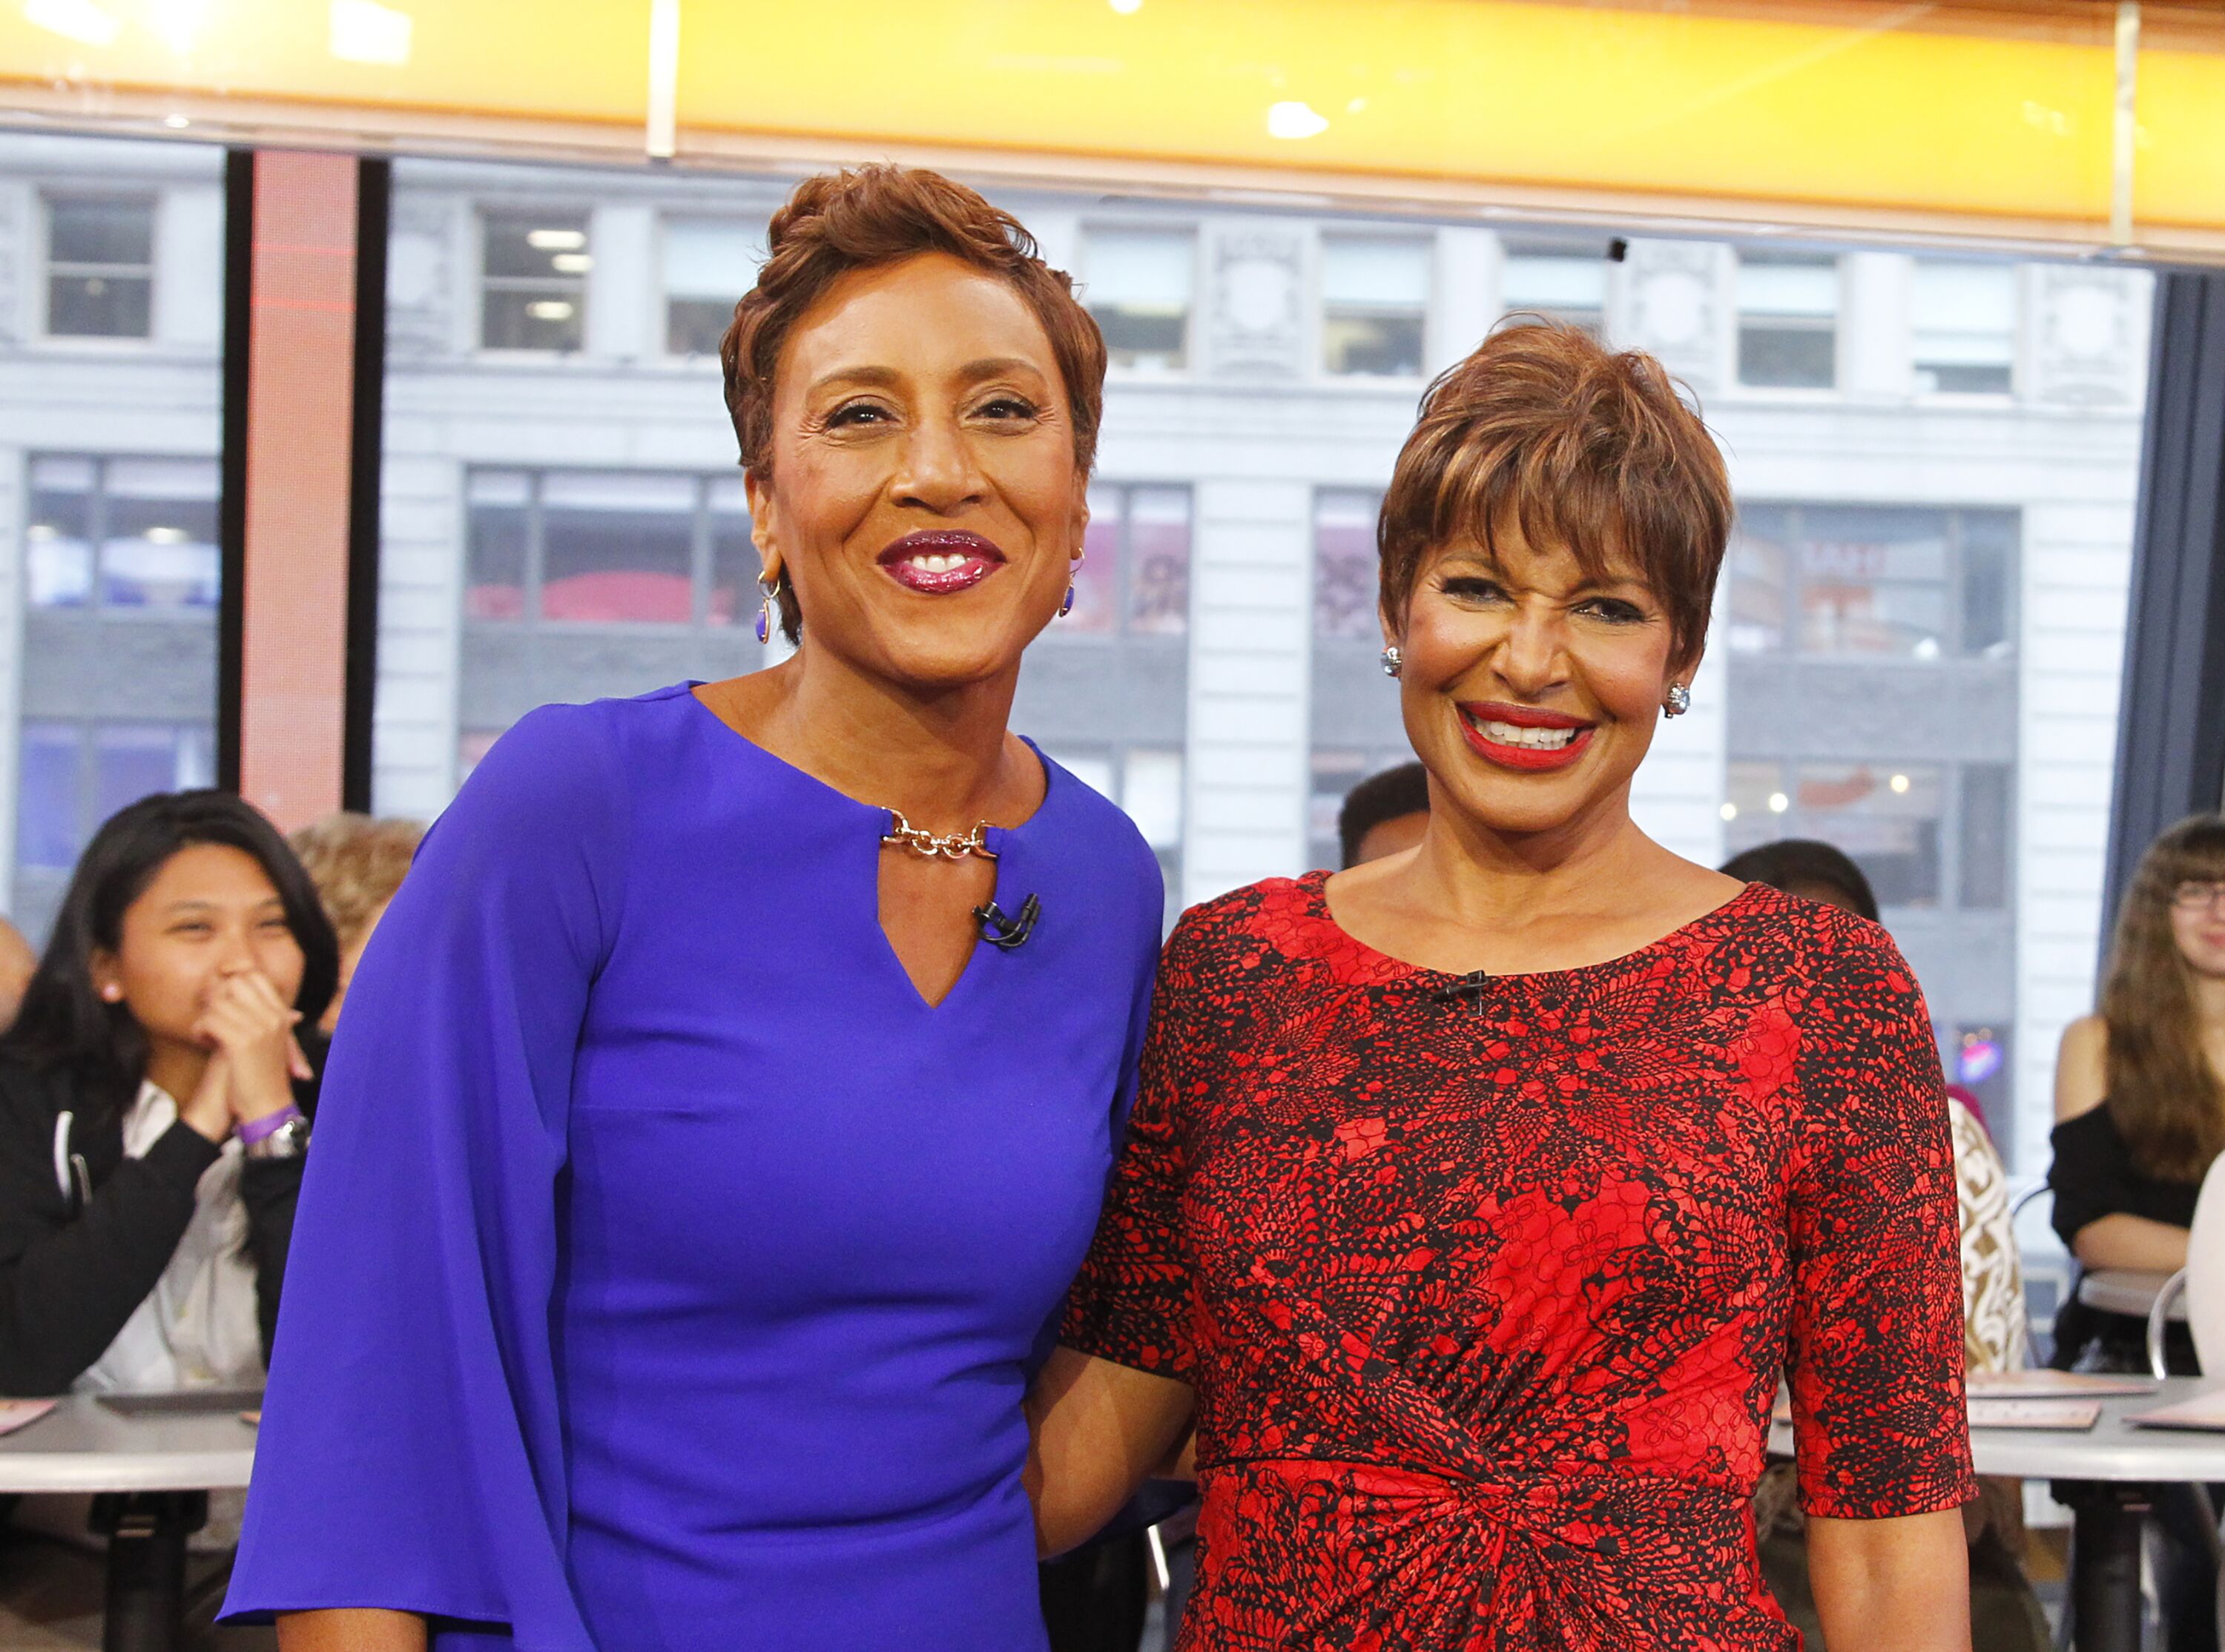 Robin Roberts celebrates her 5th birthday, which commemorates the day she received a lifesaving bone-marrow transplant to treat MDS on "Good Morning America," Wednesday, September 20, 2017 | Photo: Getty Images